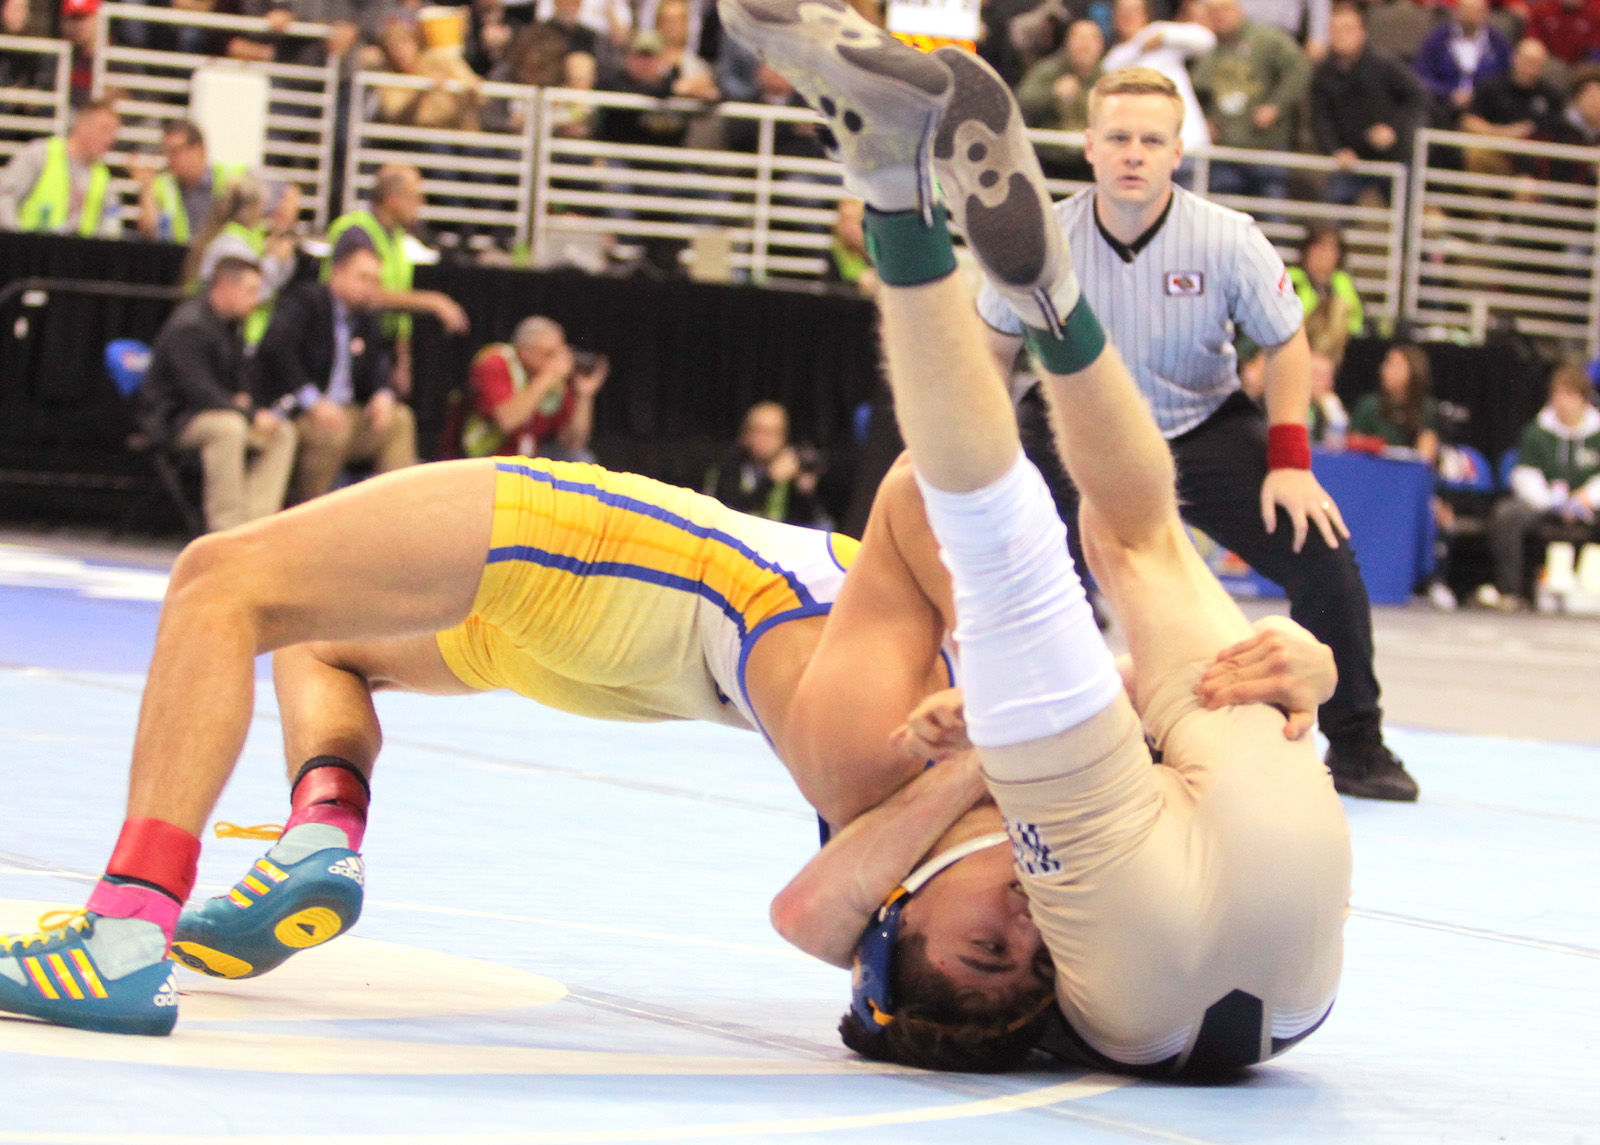 Three Gering wrestlers join Scottsbluffs Paul Garcia in the state wrestling finals